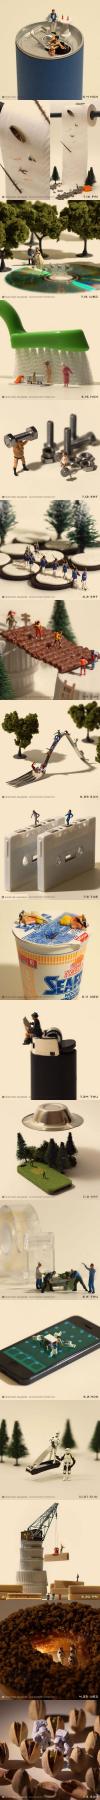 tanaka tatsuya combined little people and everyday objects to create an art like never seen before